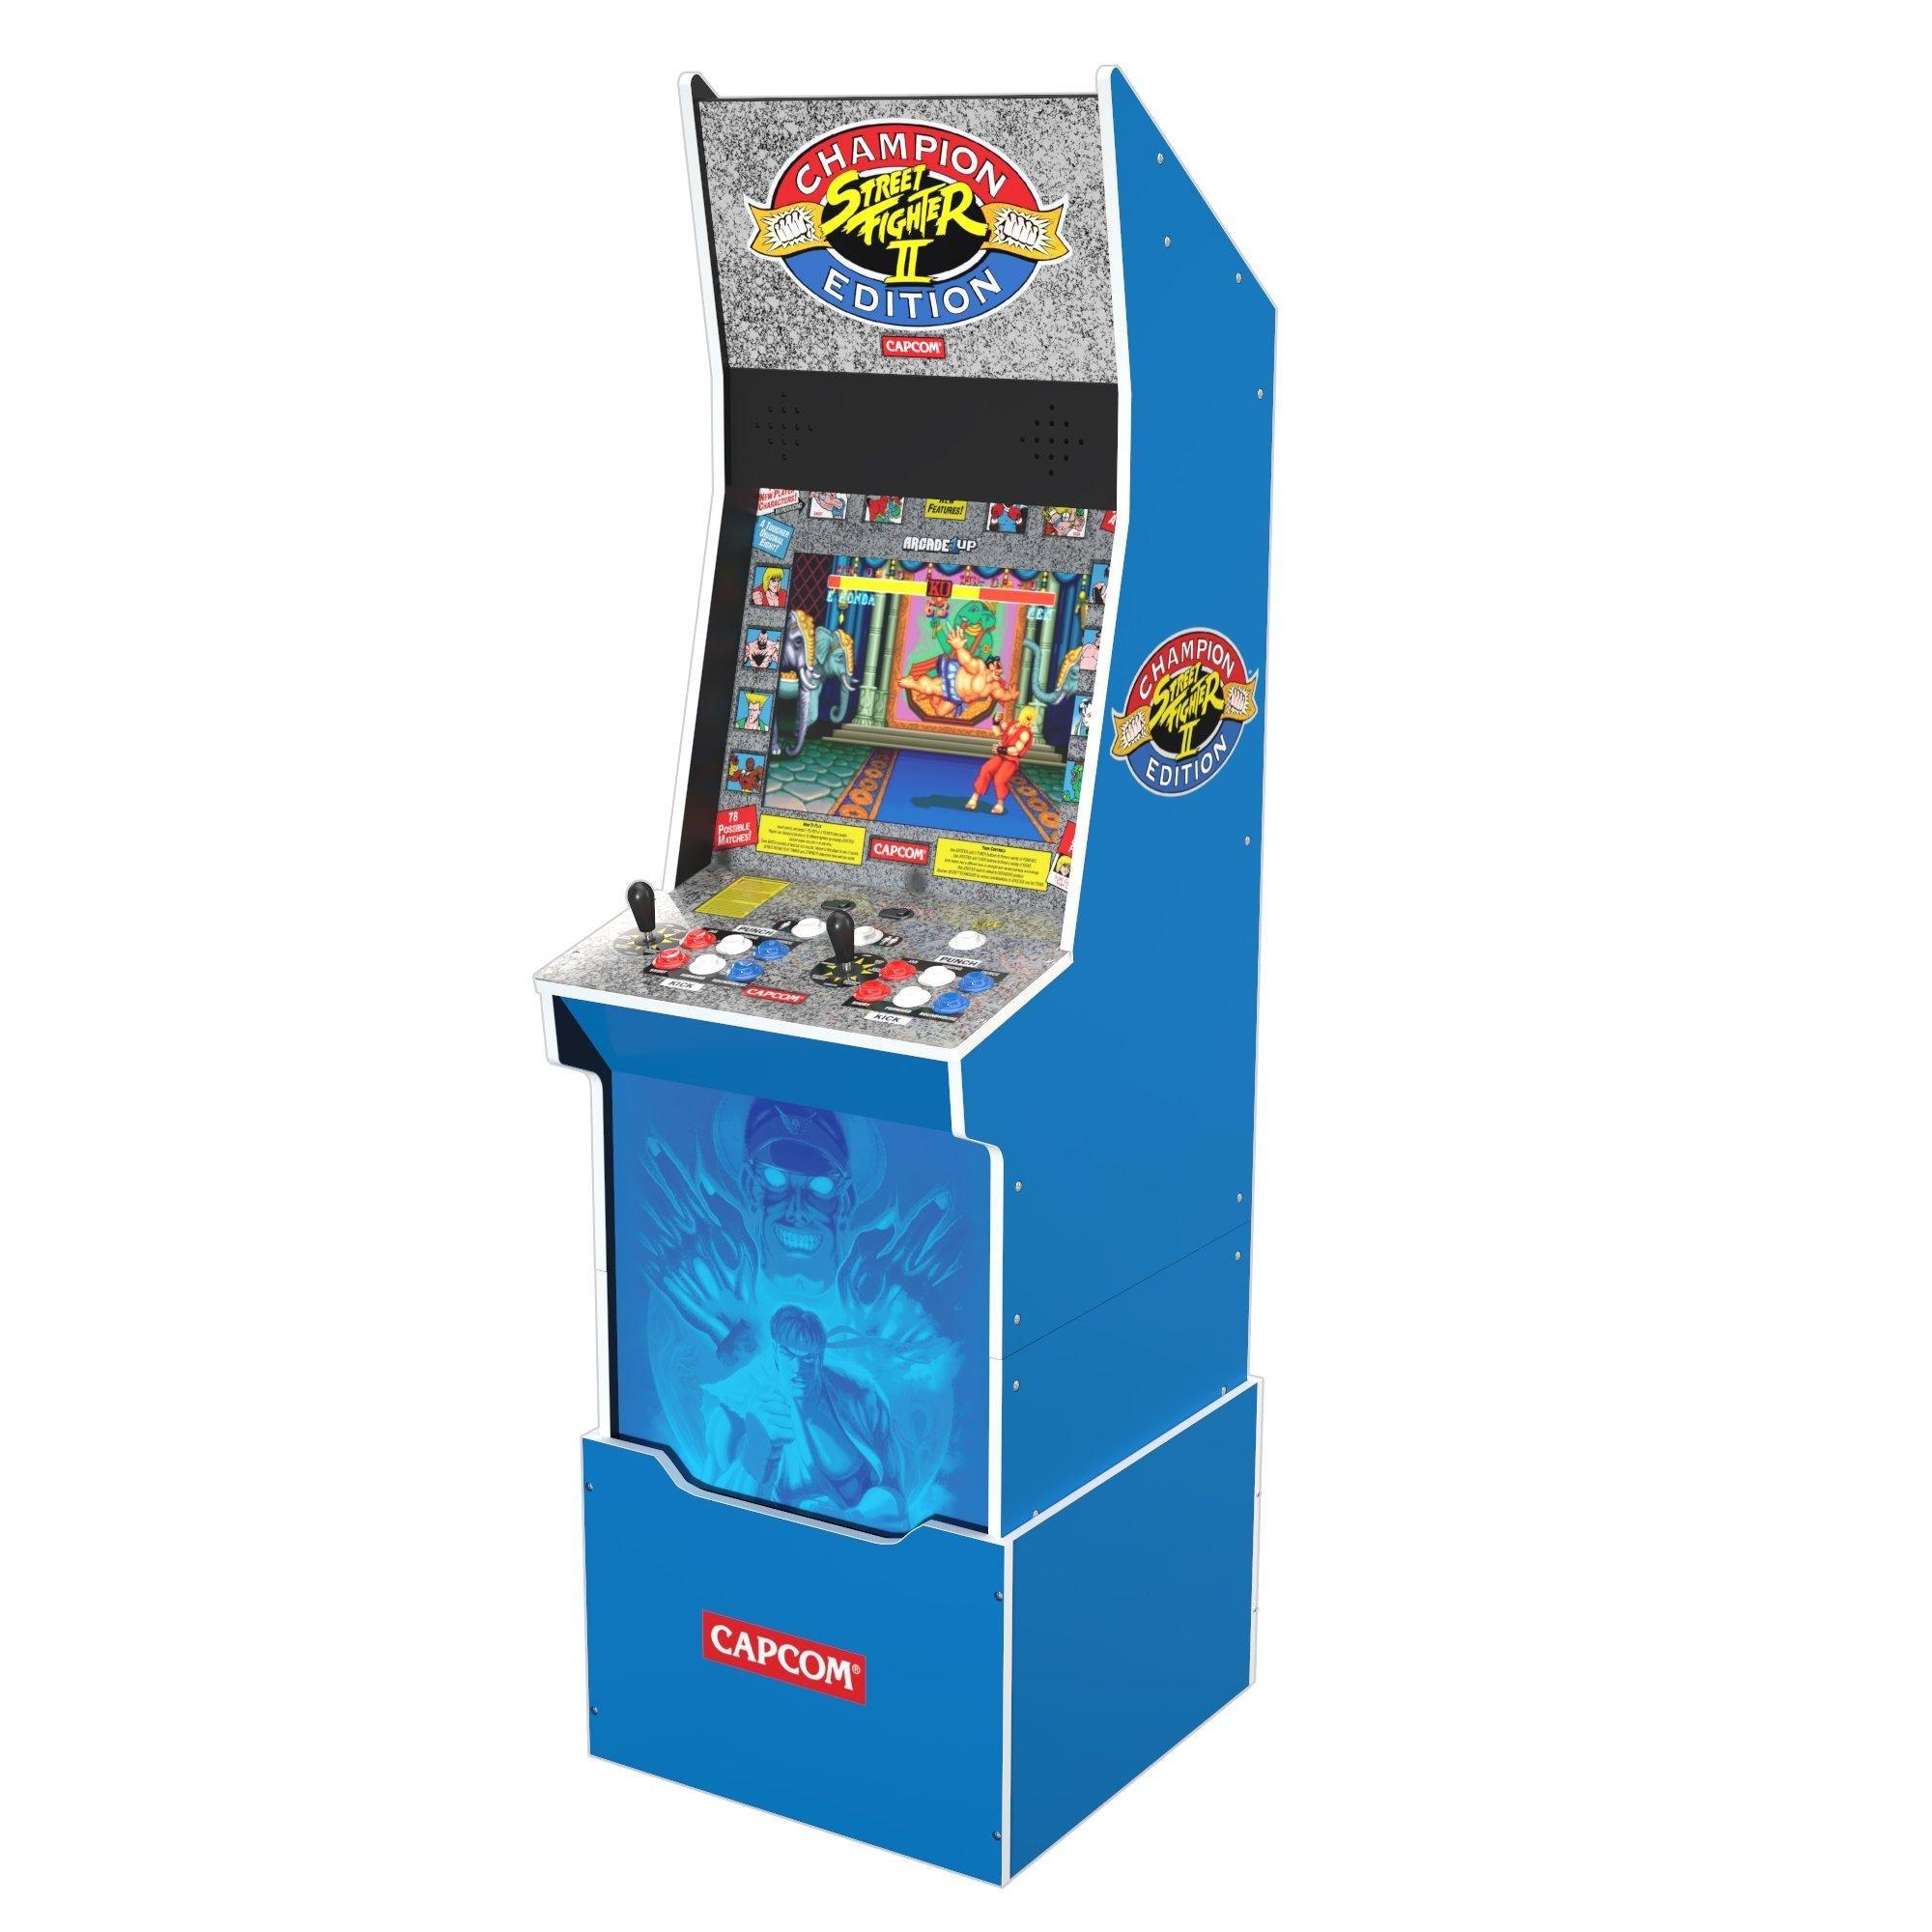 list item 2 of 8 Street Fighter II Champion Edition Big Blue Arcade Cabinet with Riser